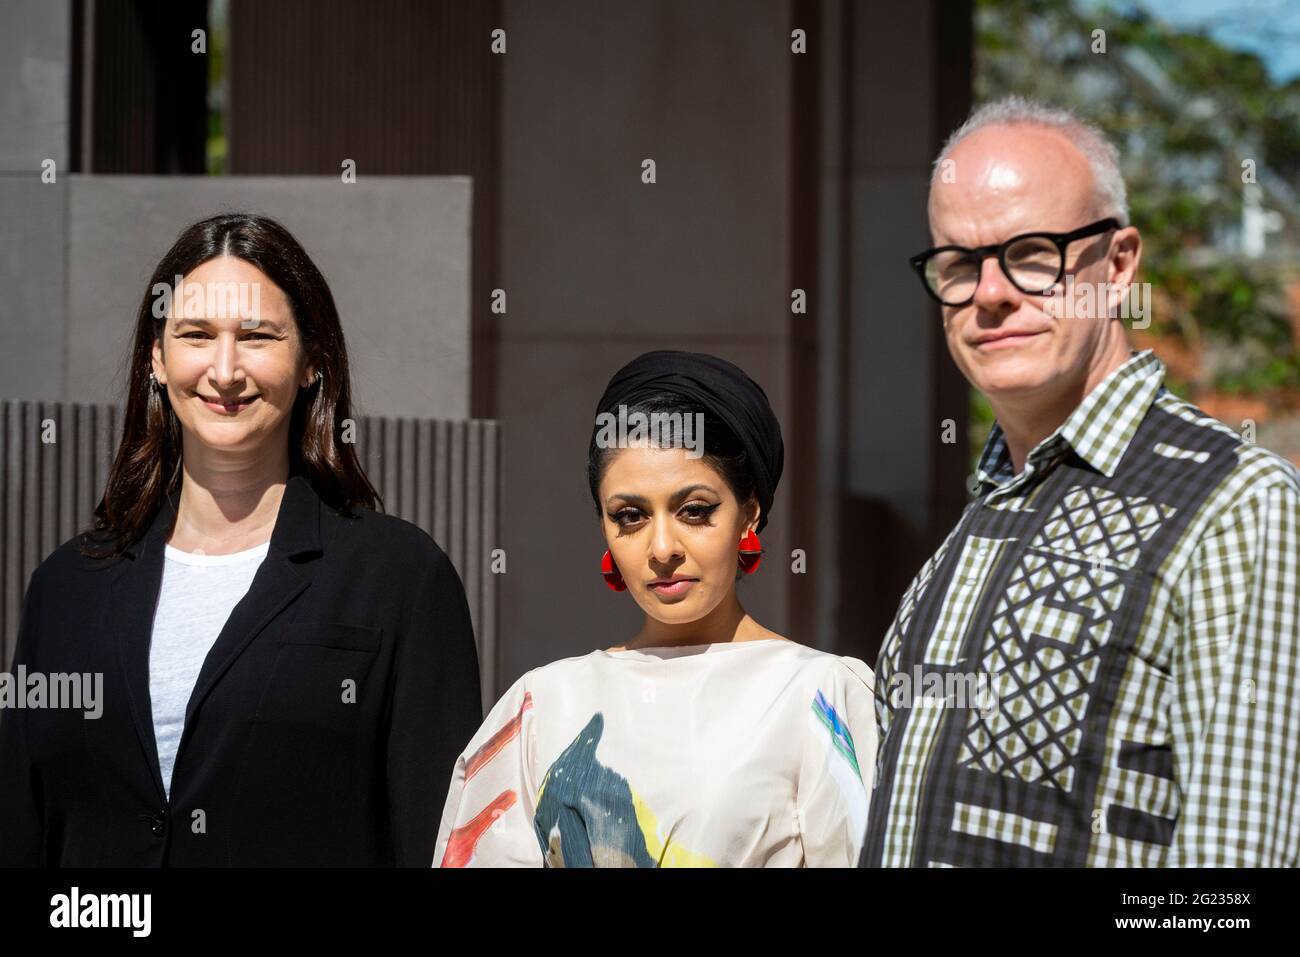 London, UK.  8 June 2021.  (L to R) Bettina Koprek, CEO, Serpentine, architect Sumayya Vally and Hans Ulrich Obrist, Artistic Director, pose at the unveiling of the 20th Serpentine Pavilion in Kensington Gardens. It is designed by Johannesburg-based practice Counterspace and directed by Vally, who is the youngest architect to be commissioned for this internationally renowned architecture programme.  The design references the architecture in migrant communities in some of London’s neighbourhoods and is on display 11 June to 17 October.   Credit: Stephen Chung / Alamy Live News Stock Photo